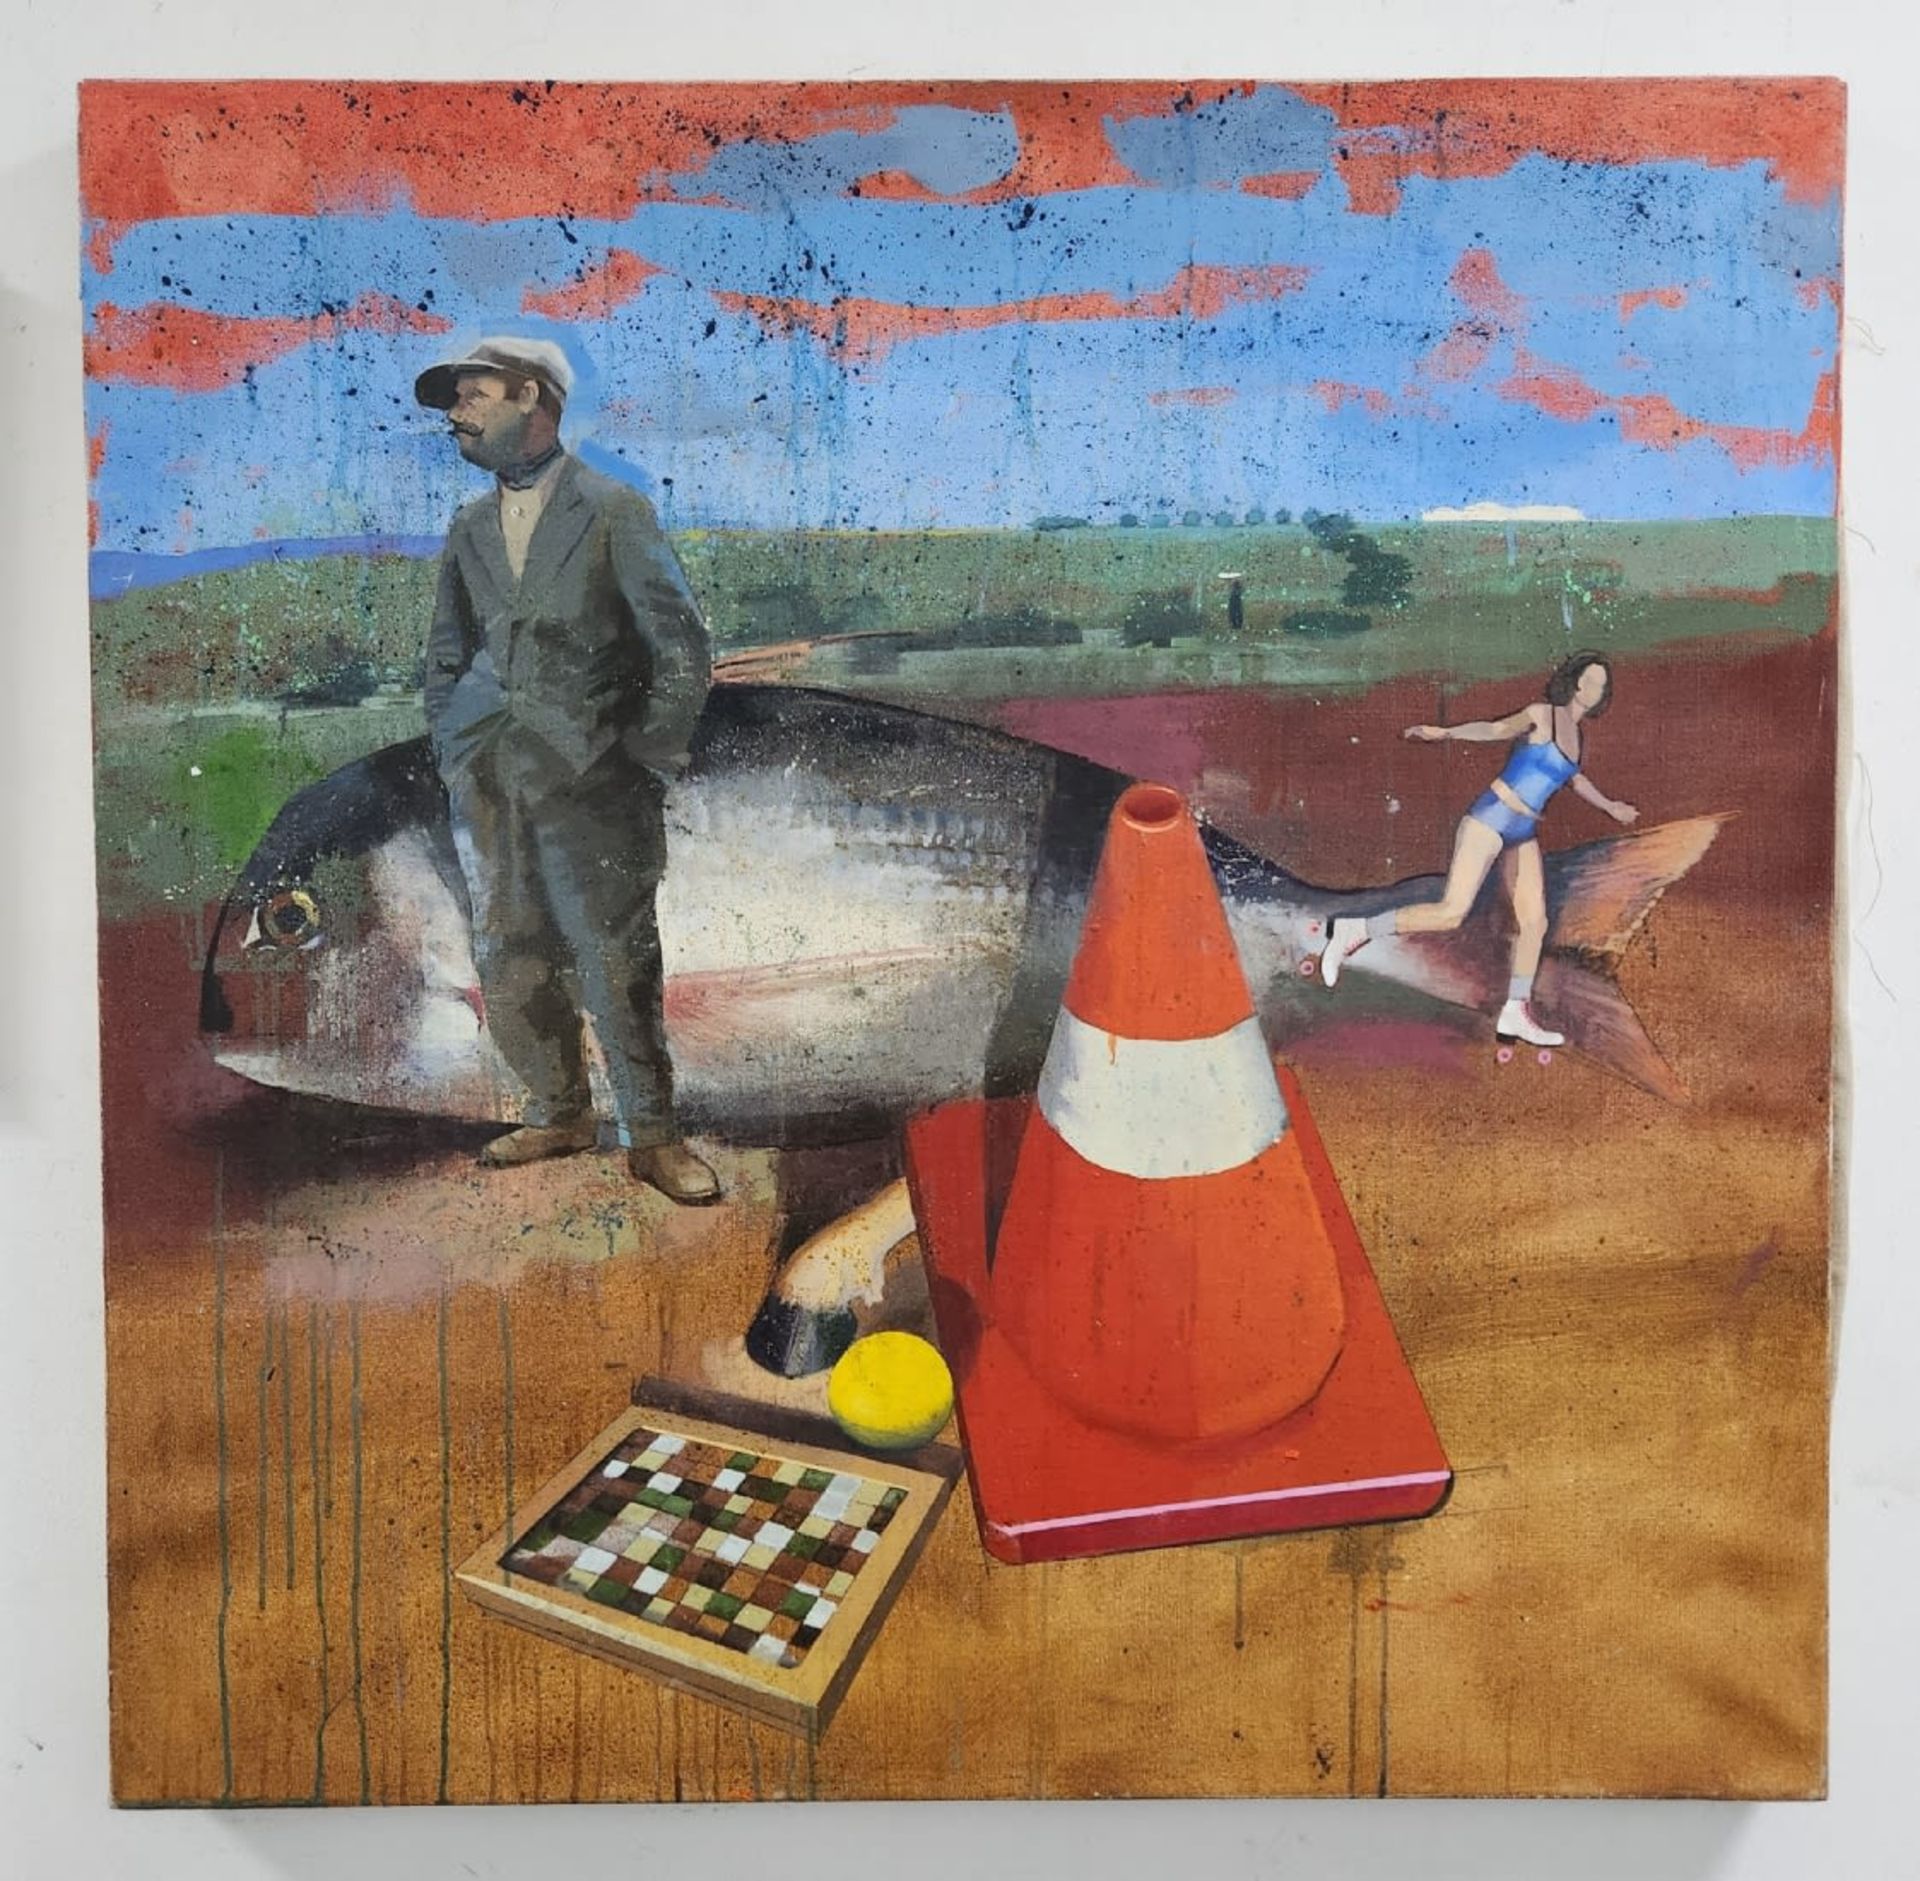 'Man and Fish' - painting, kobi Shahar - oil on canvas, signed. Dimensions: 90x91 cm. The artist - Image 2 of 3